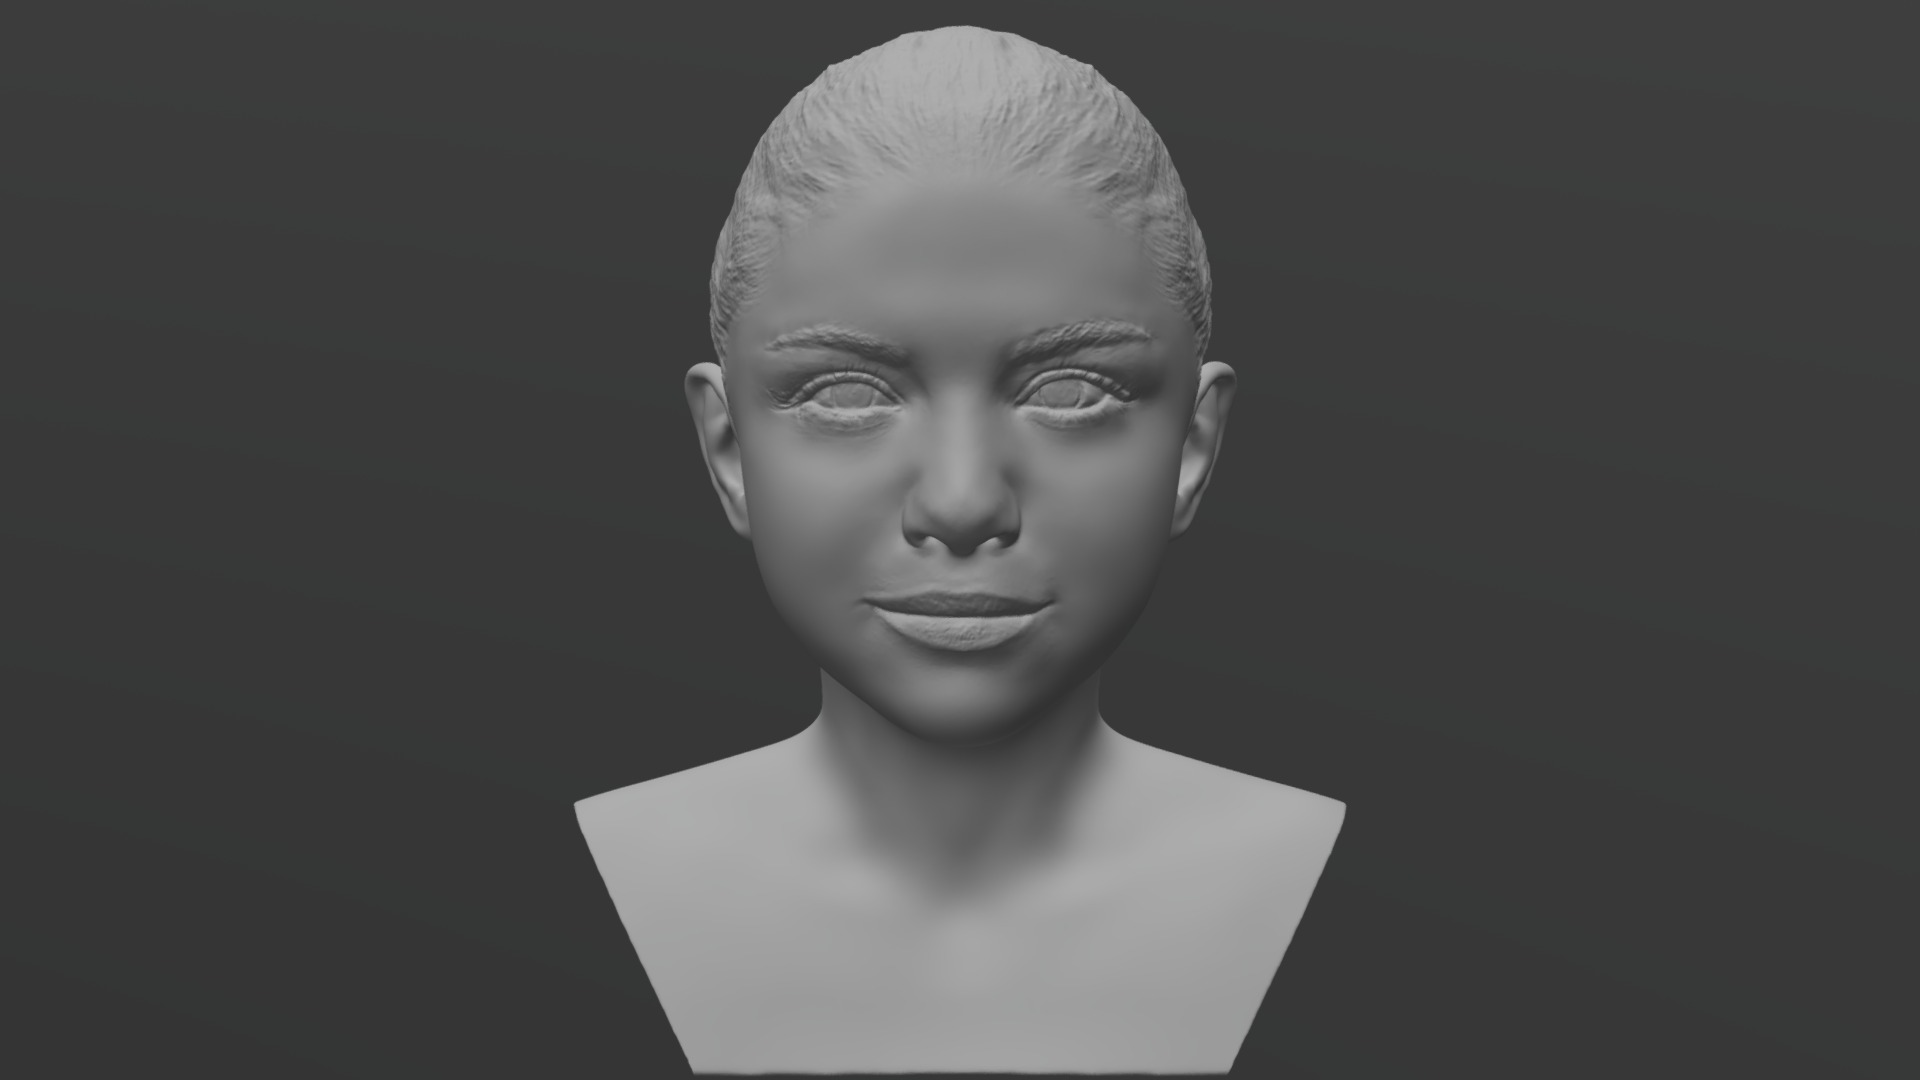 3D model Selena Gomez bust for 3D printing - This is a 3D model of the Selena Gomez bust for 3D printing. The 3D model is about a person with a white shirt.